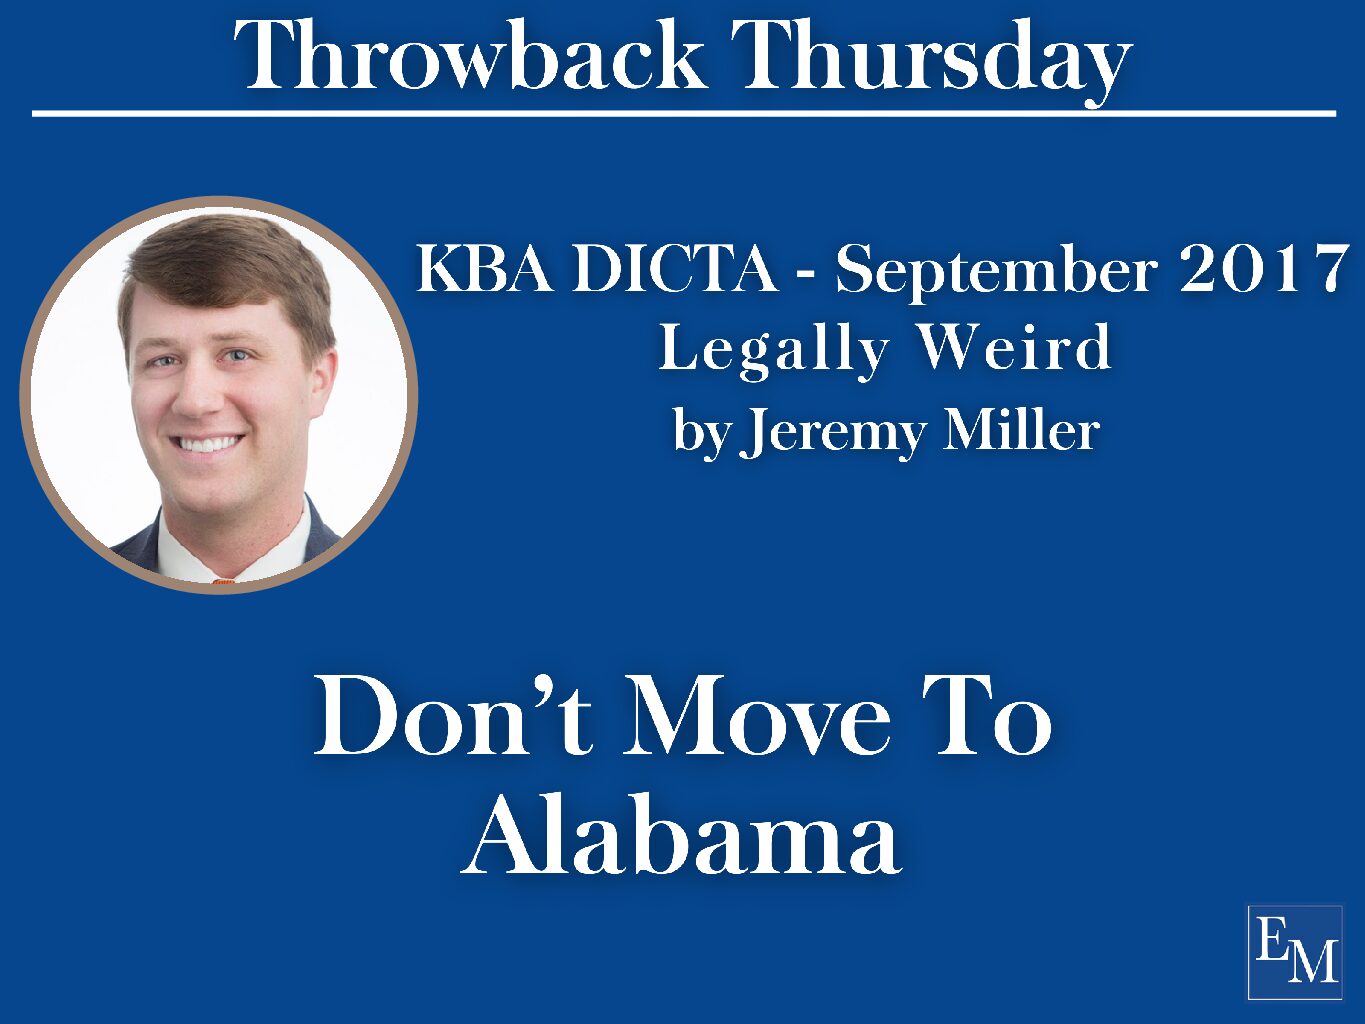 Throwback Thursday – Don’t Move To Alabama by Jeremy Miller